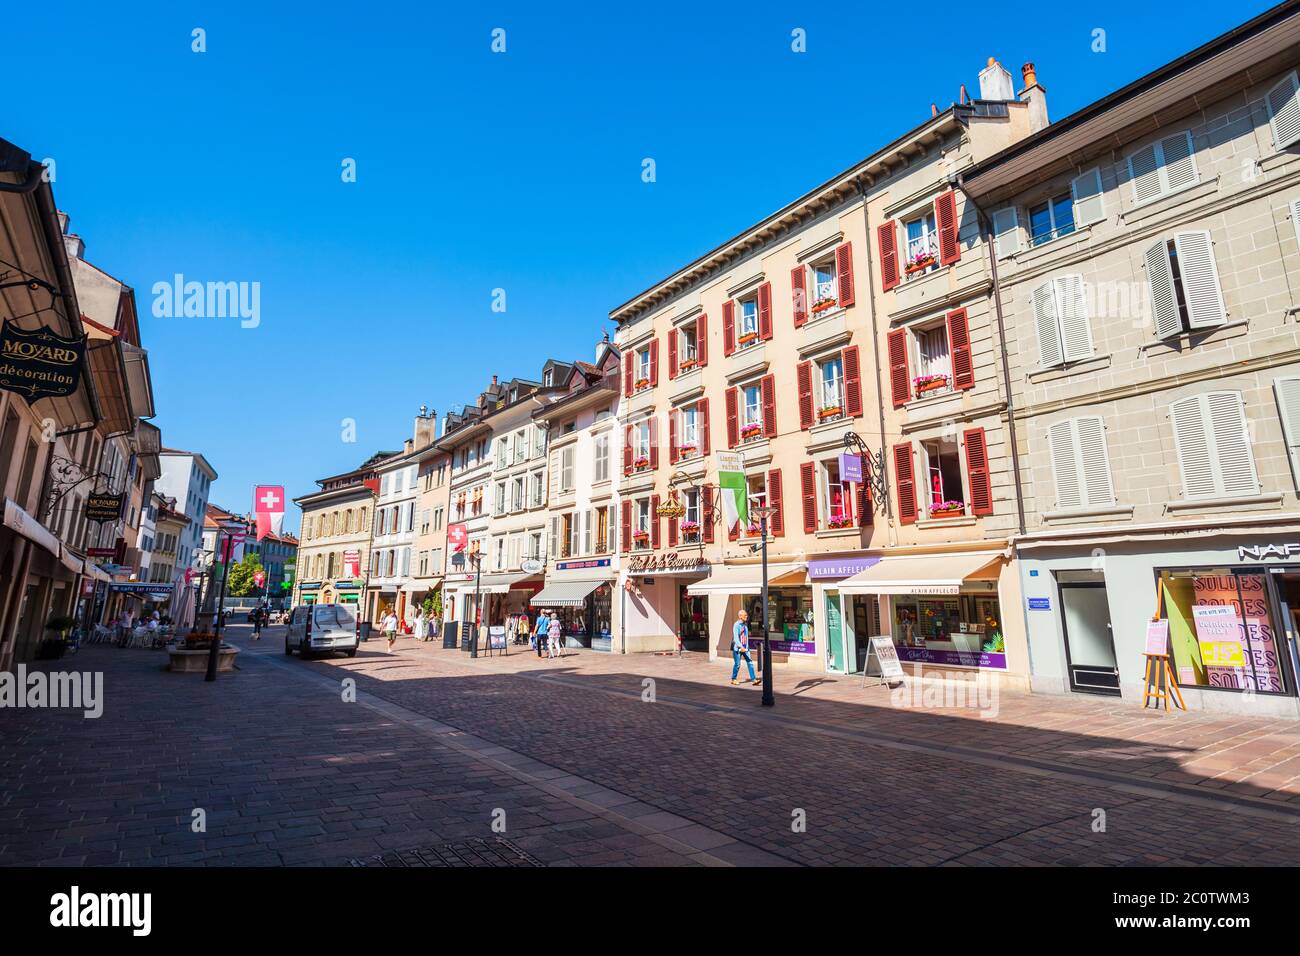 MORGES, SWITZERLAND - JULY 19, 2019: Morges is a town on the shores of Lake Geneva in the canton of Vaud in Switzerland Stock Photo